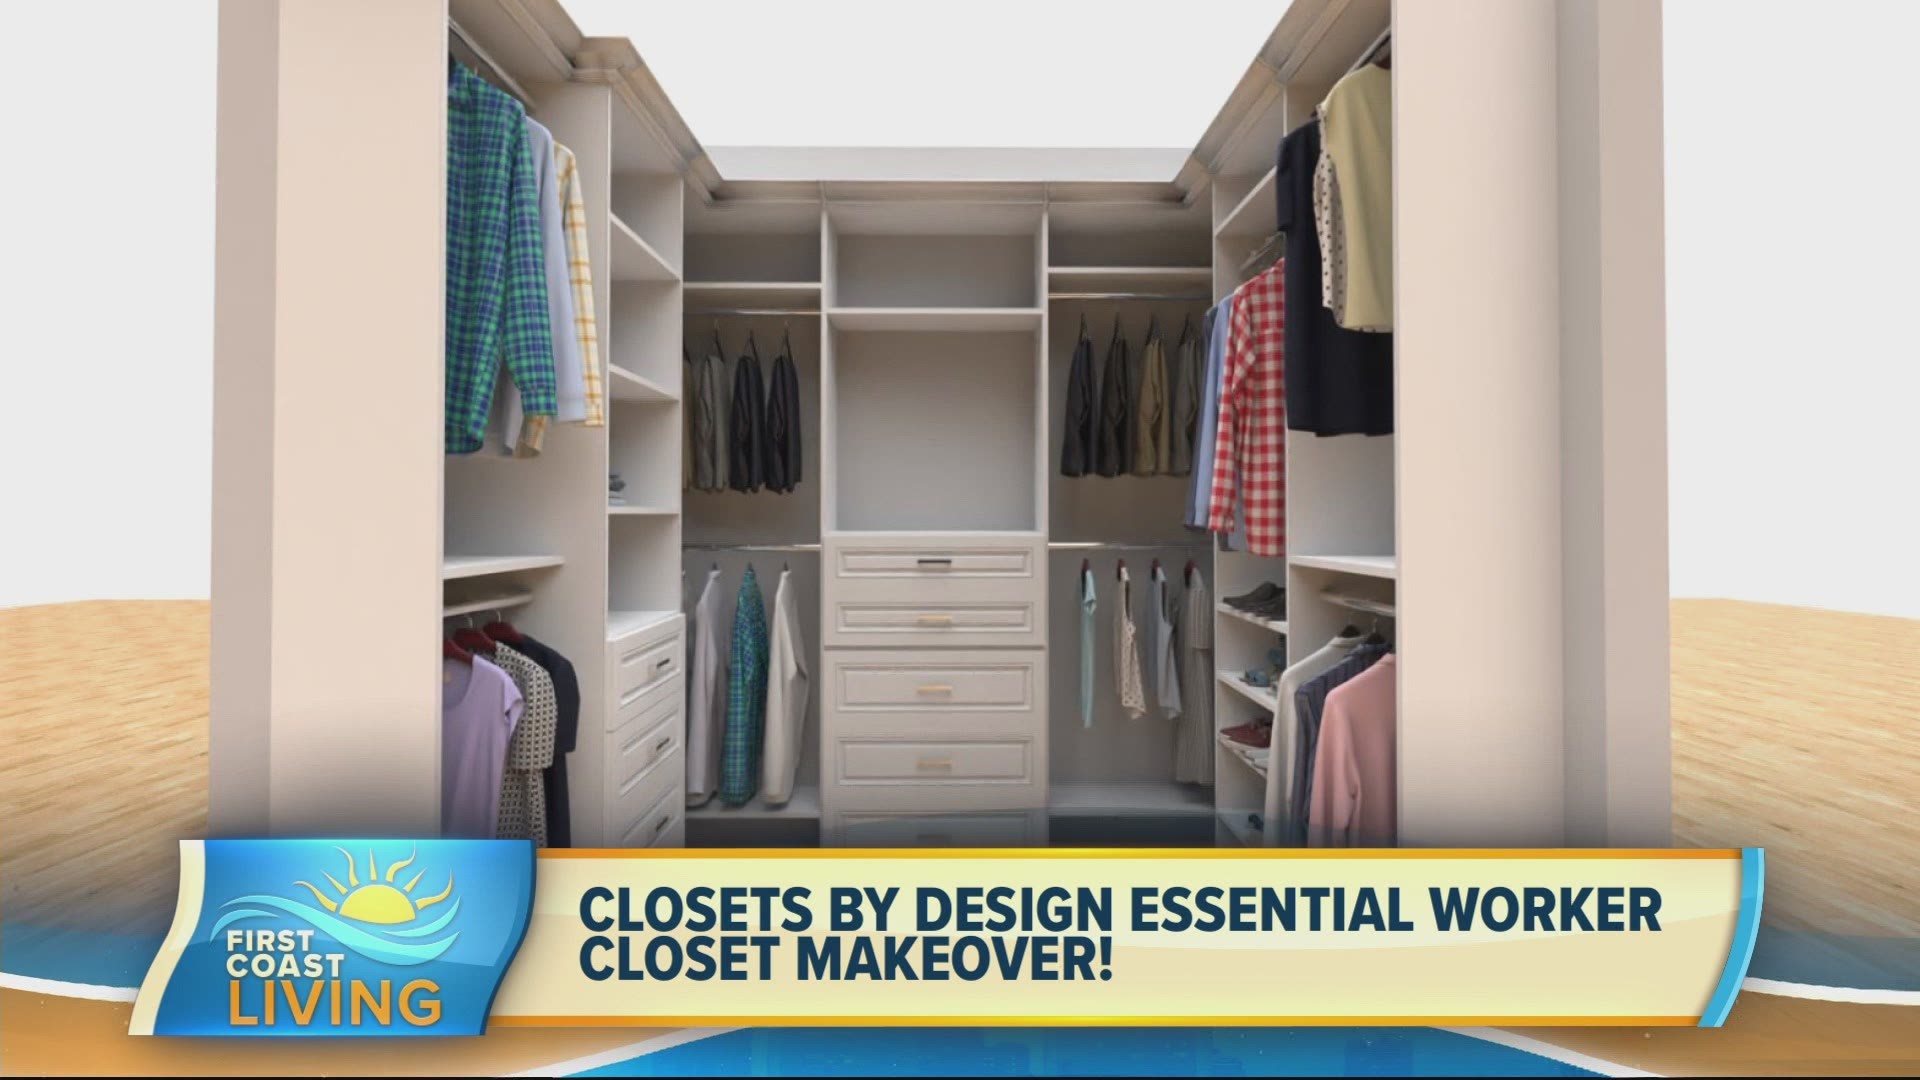 Michelle's Designer Closet - Which would you choose? 🌈